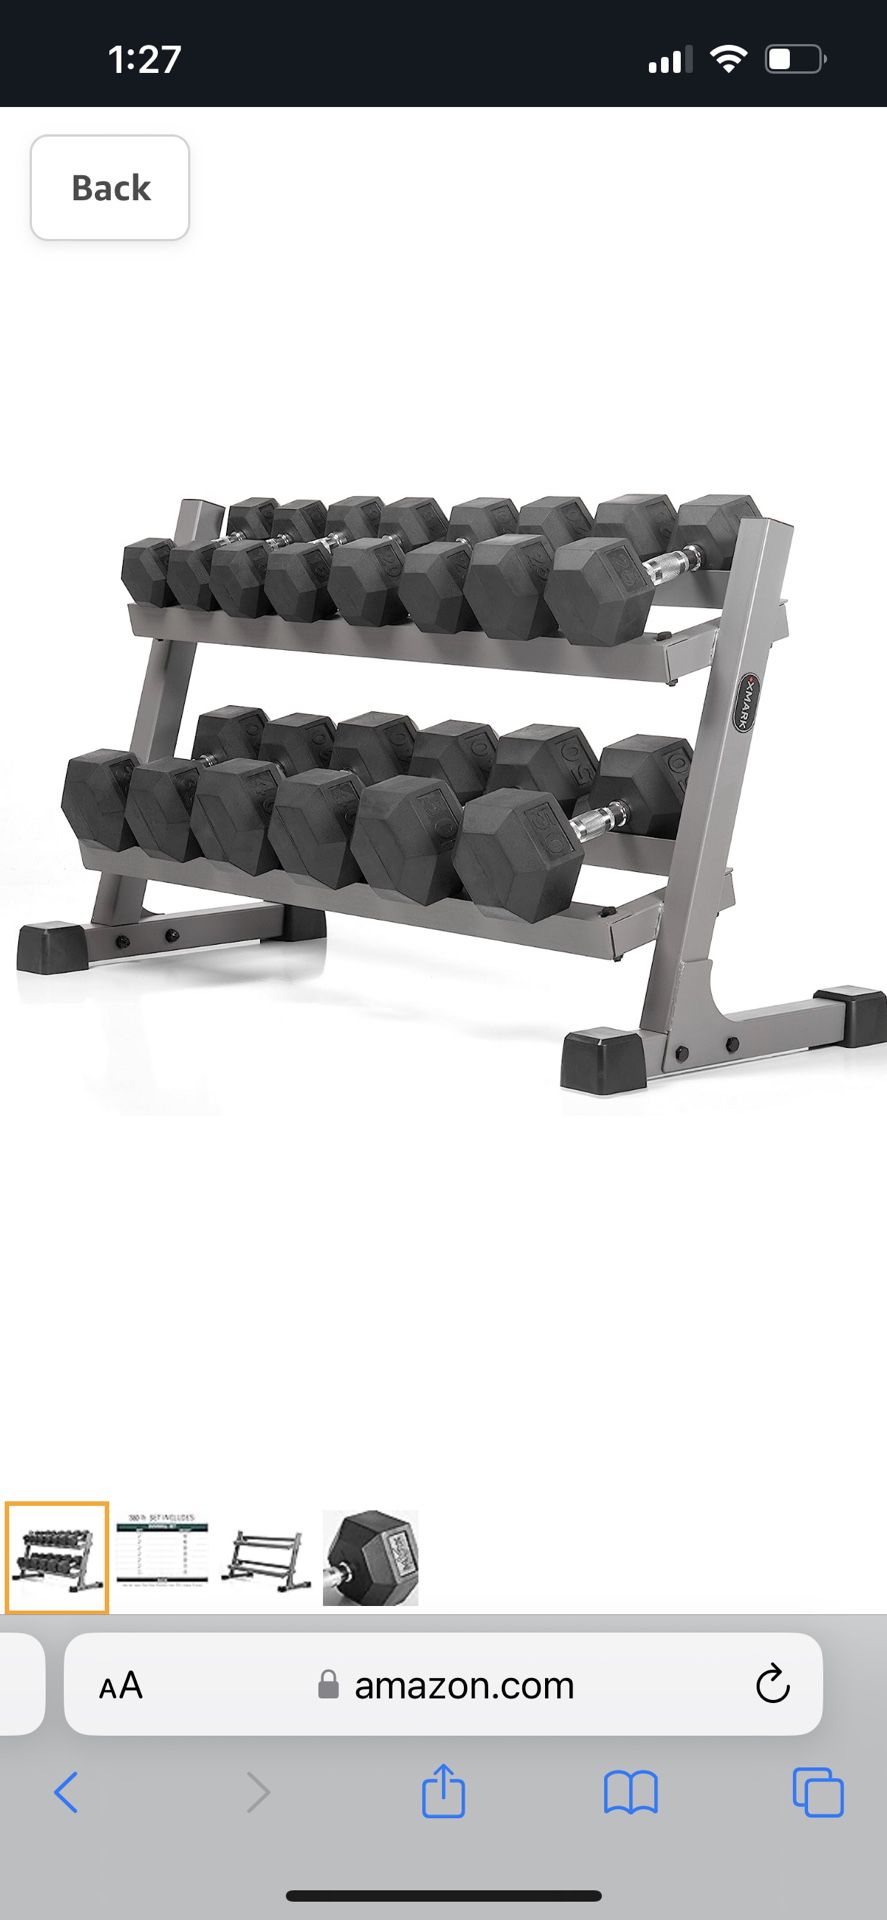 XMARK Dumbbell Pair Weight Sets, 380 lbs (7 Pair) to 550 lbs (10 Pair) Hand Weights, Dumbbell Sets with Weight Storage or Available Individually, Comp